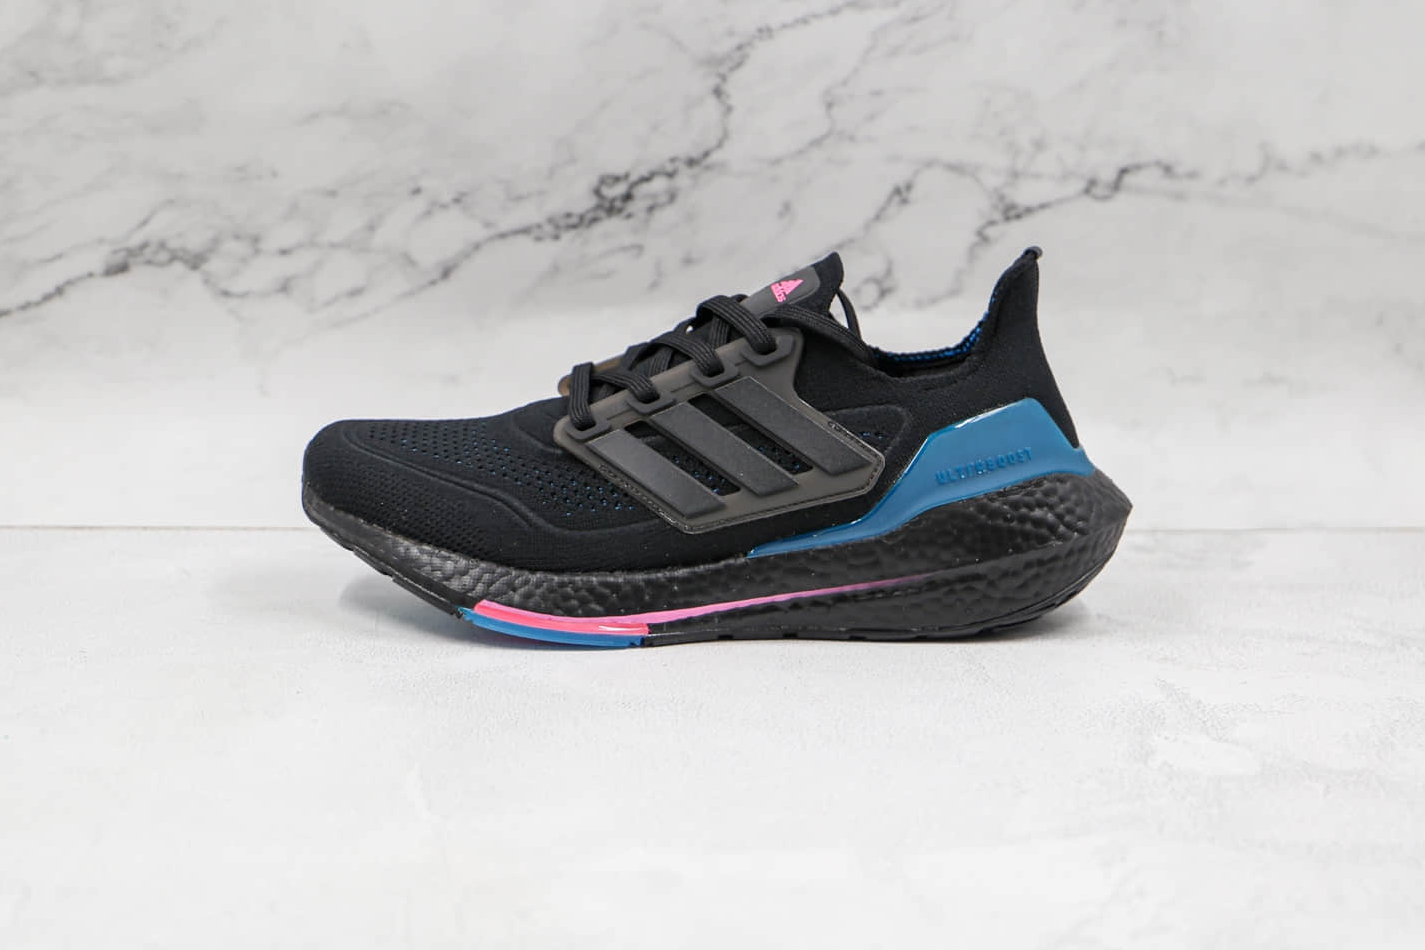 Adidas UltraBoost 21 Black Active Teal FZ1921 - Latest Release at Best Price